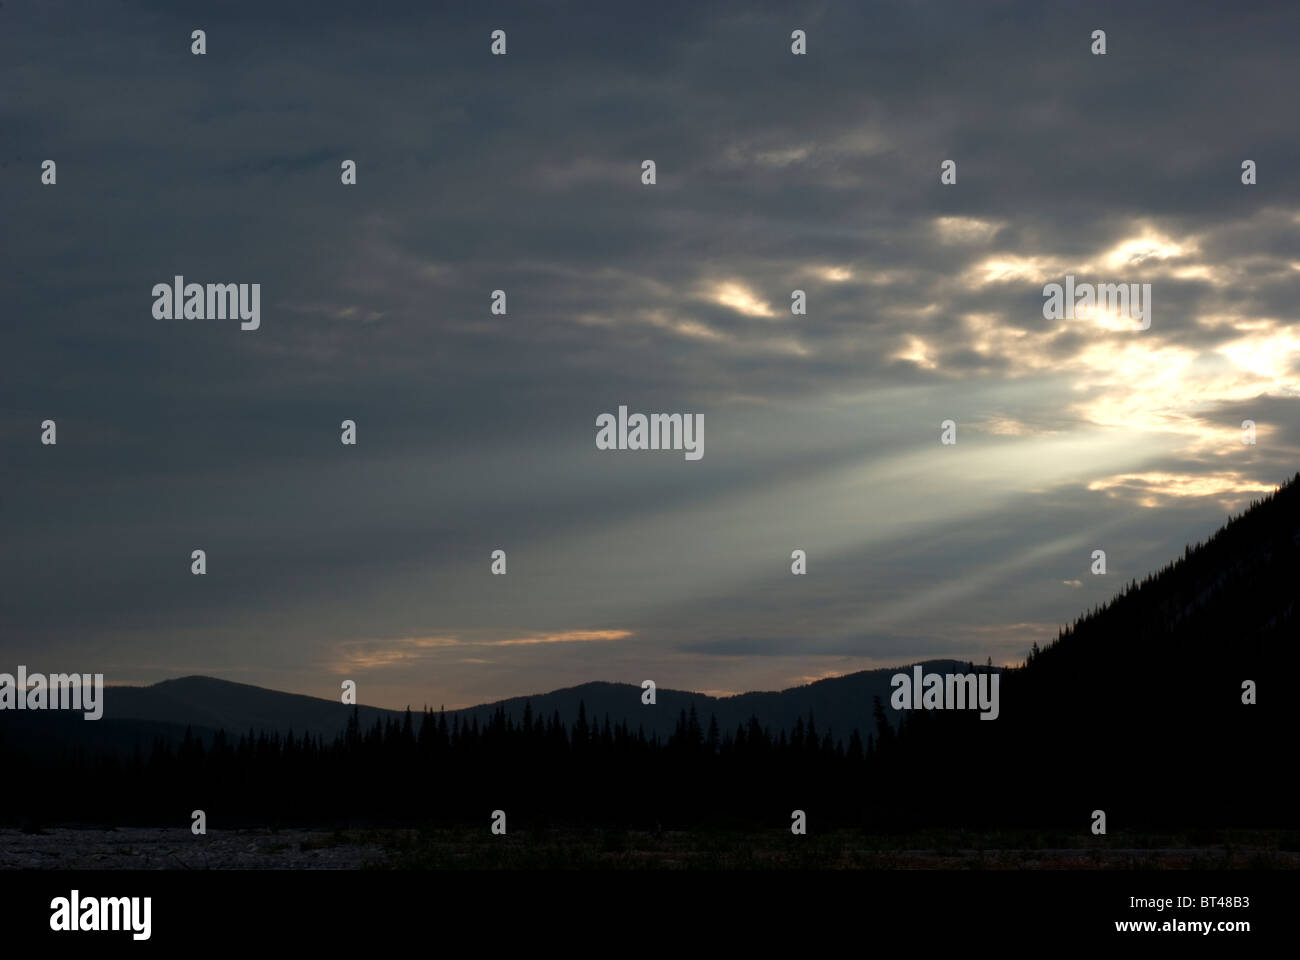 Sunlight through clouds in mountains Stock Photo